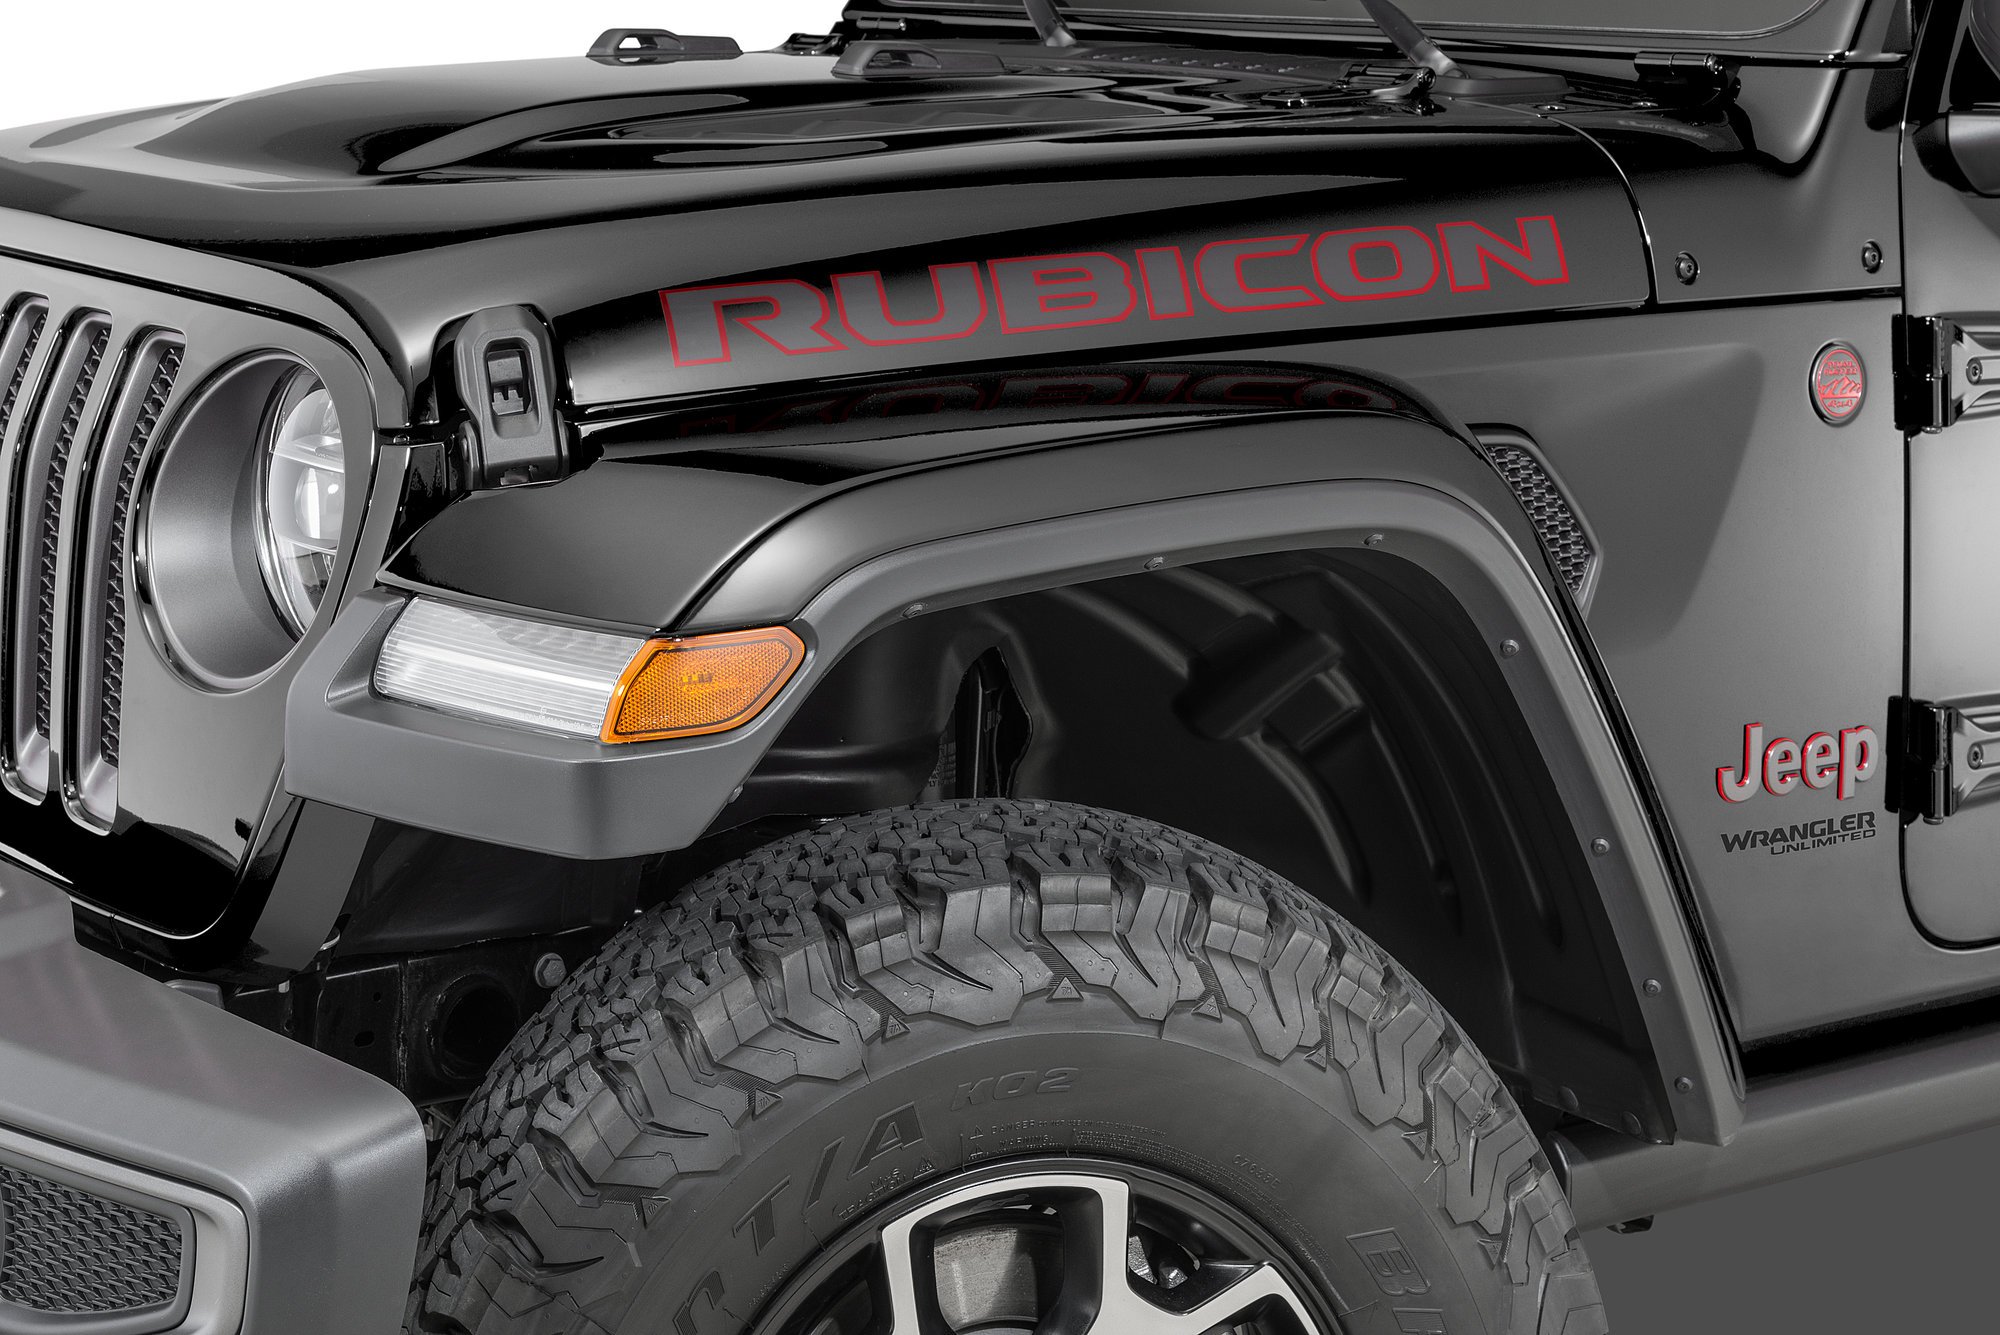 Mopar 82215376 Rubicon Hood Decal Graphic for 18-19 Jeep ...